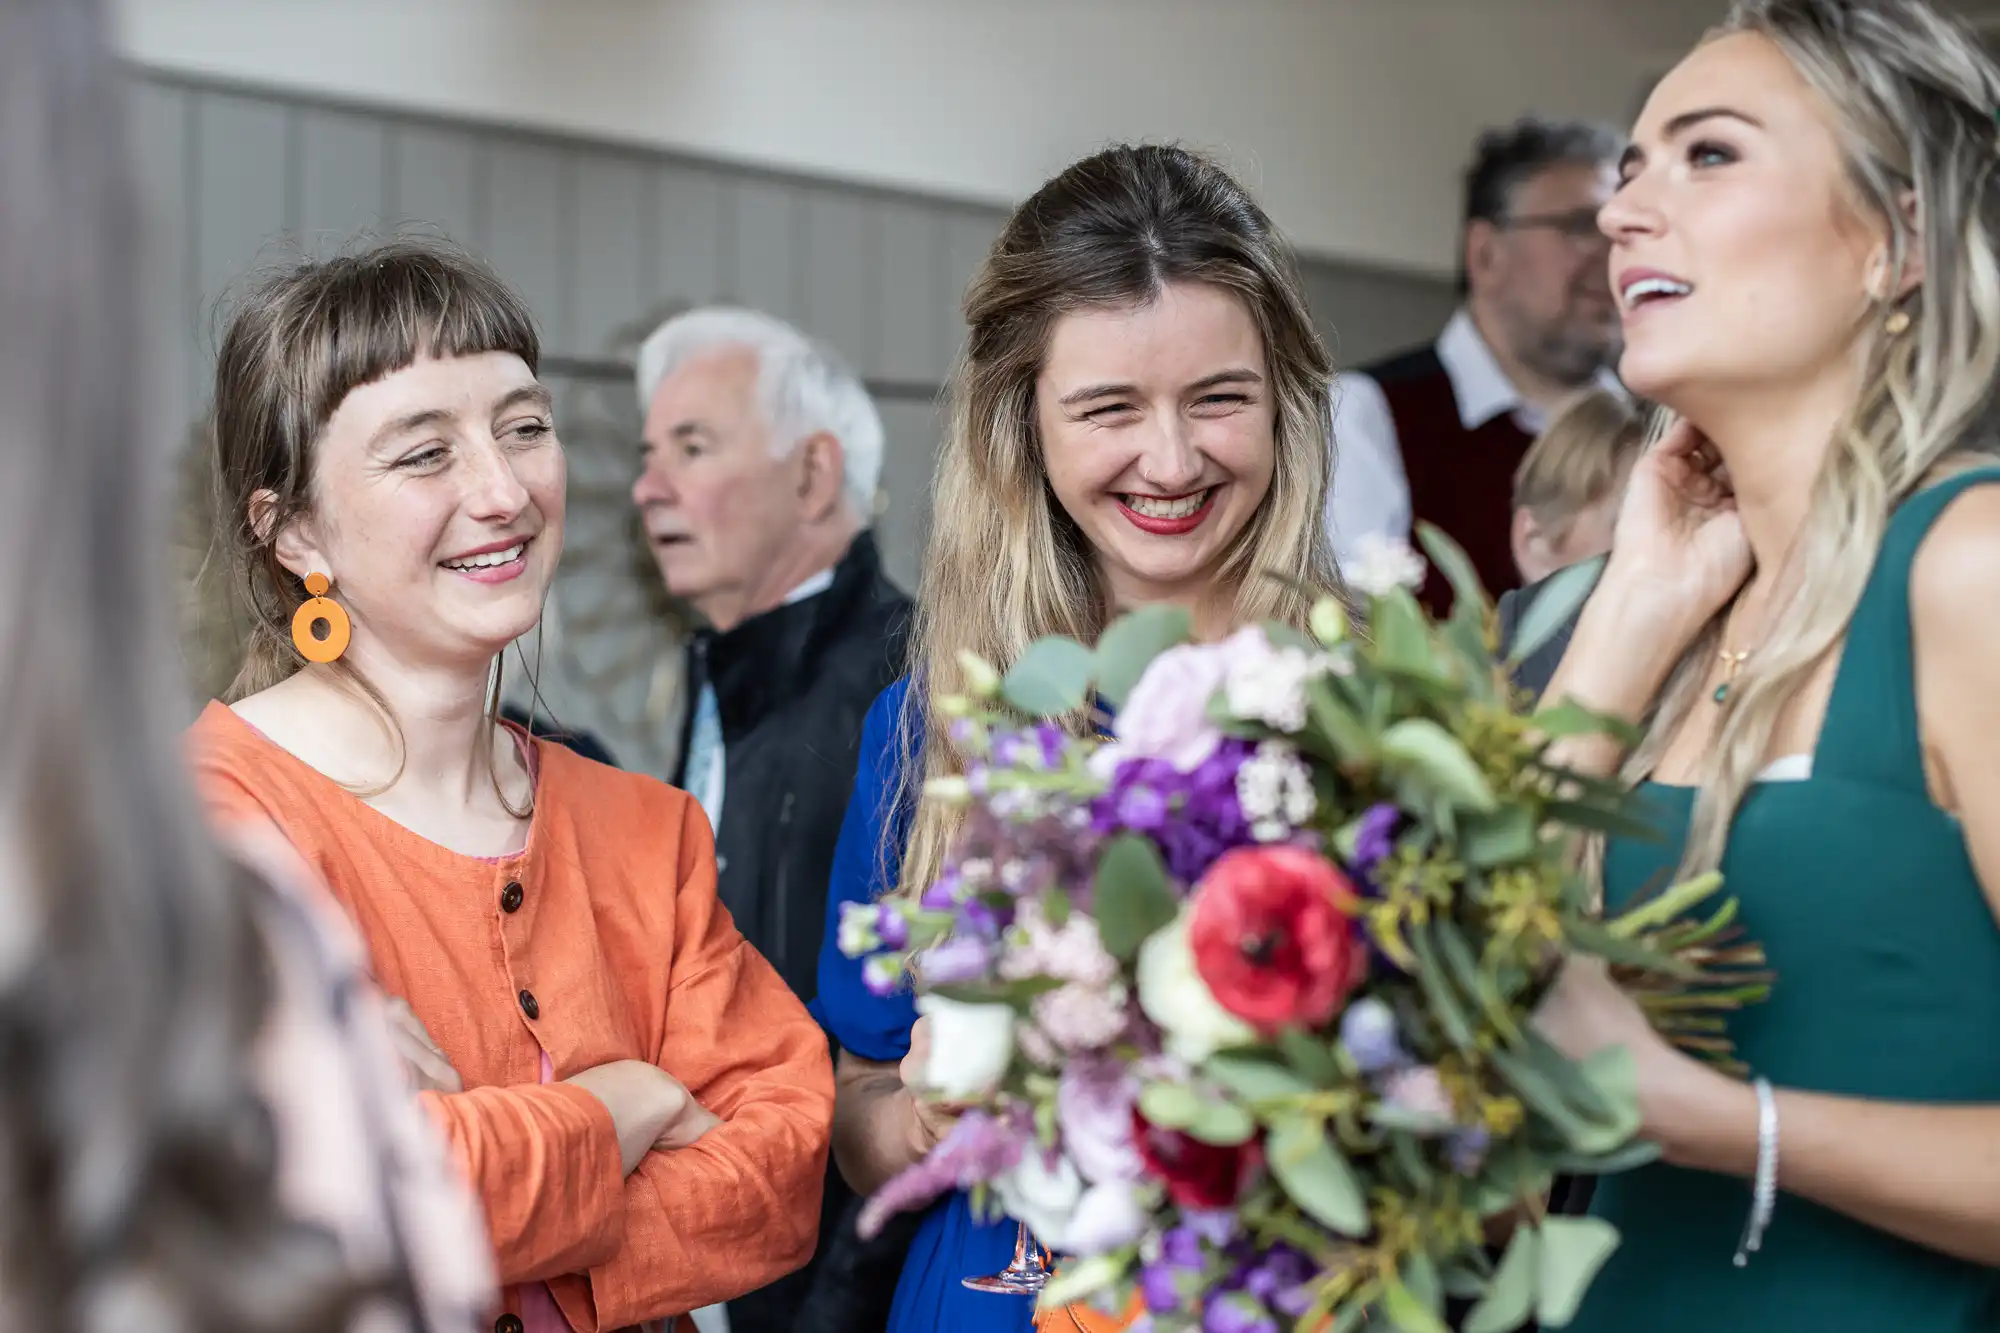 Three women, one holding a bouquet, are smiling and talking at an indoor gathering. Several other people are visible in the background.